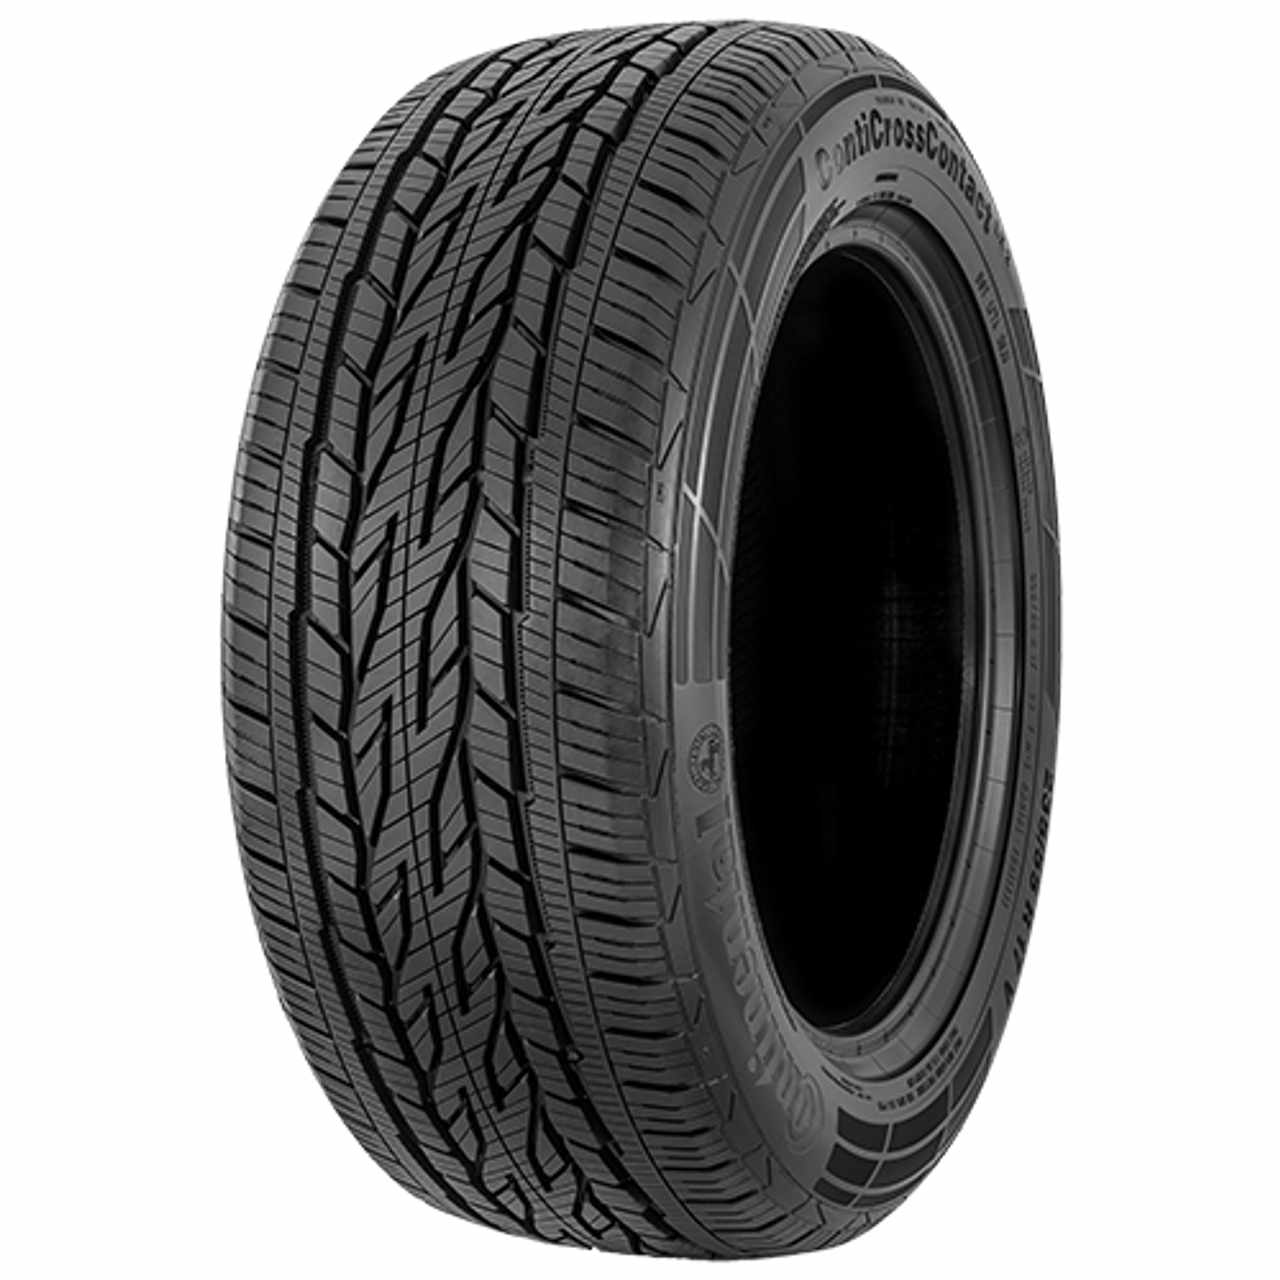 CONTINENTAL CONTICROSSCONTACT LX 2 255/70R16 111T FR BSW